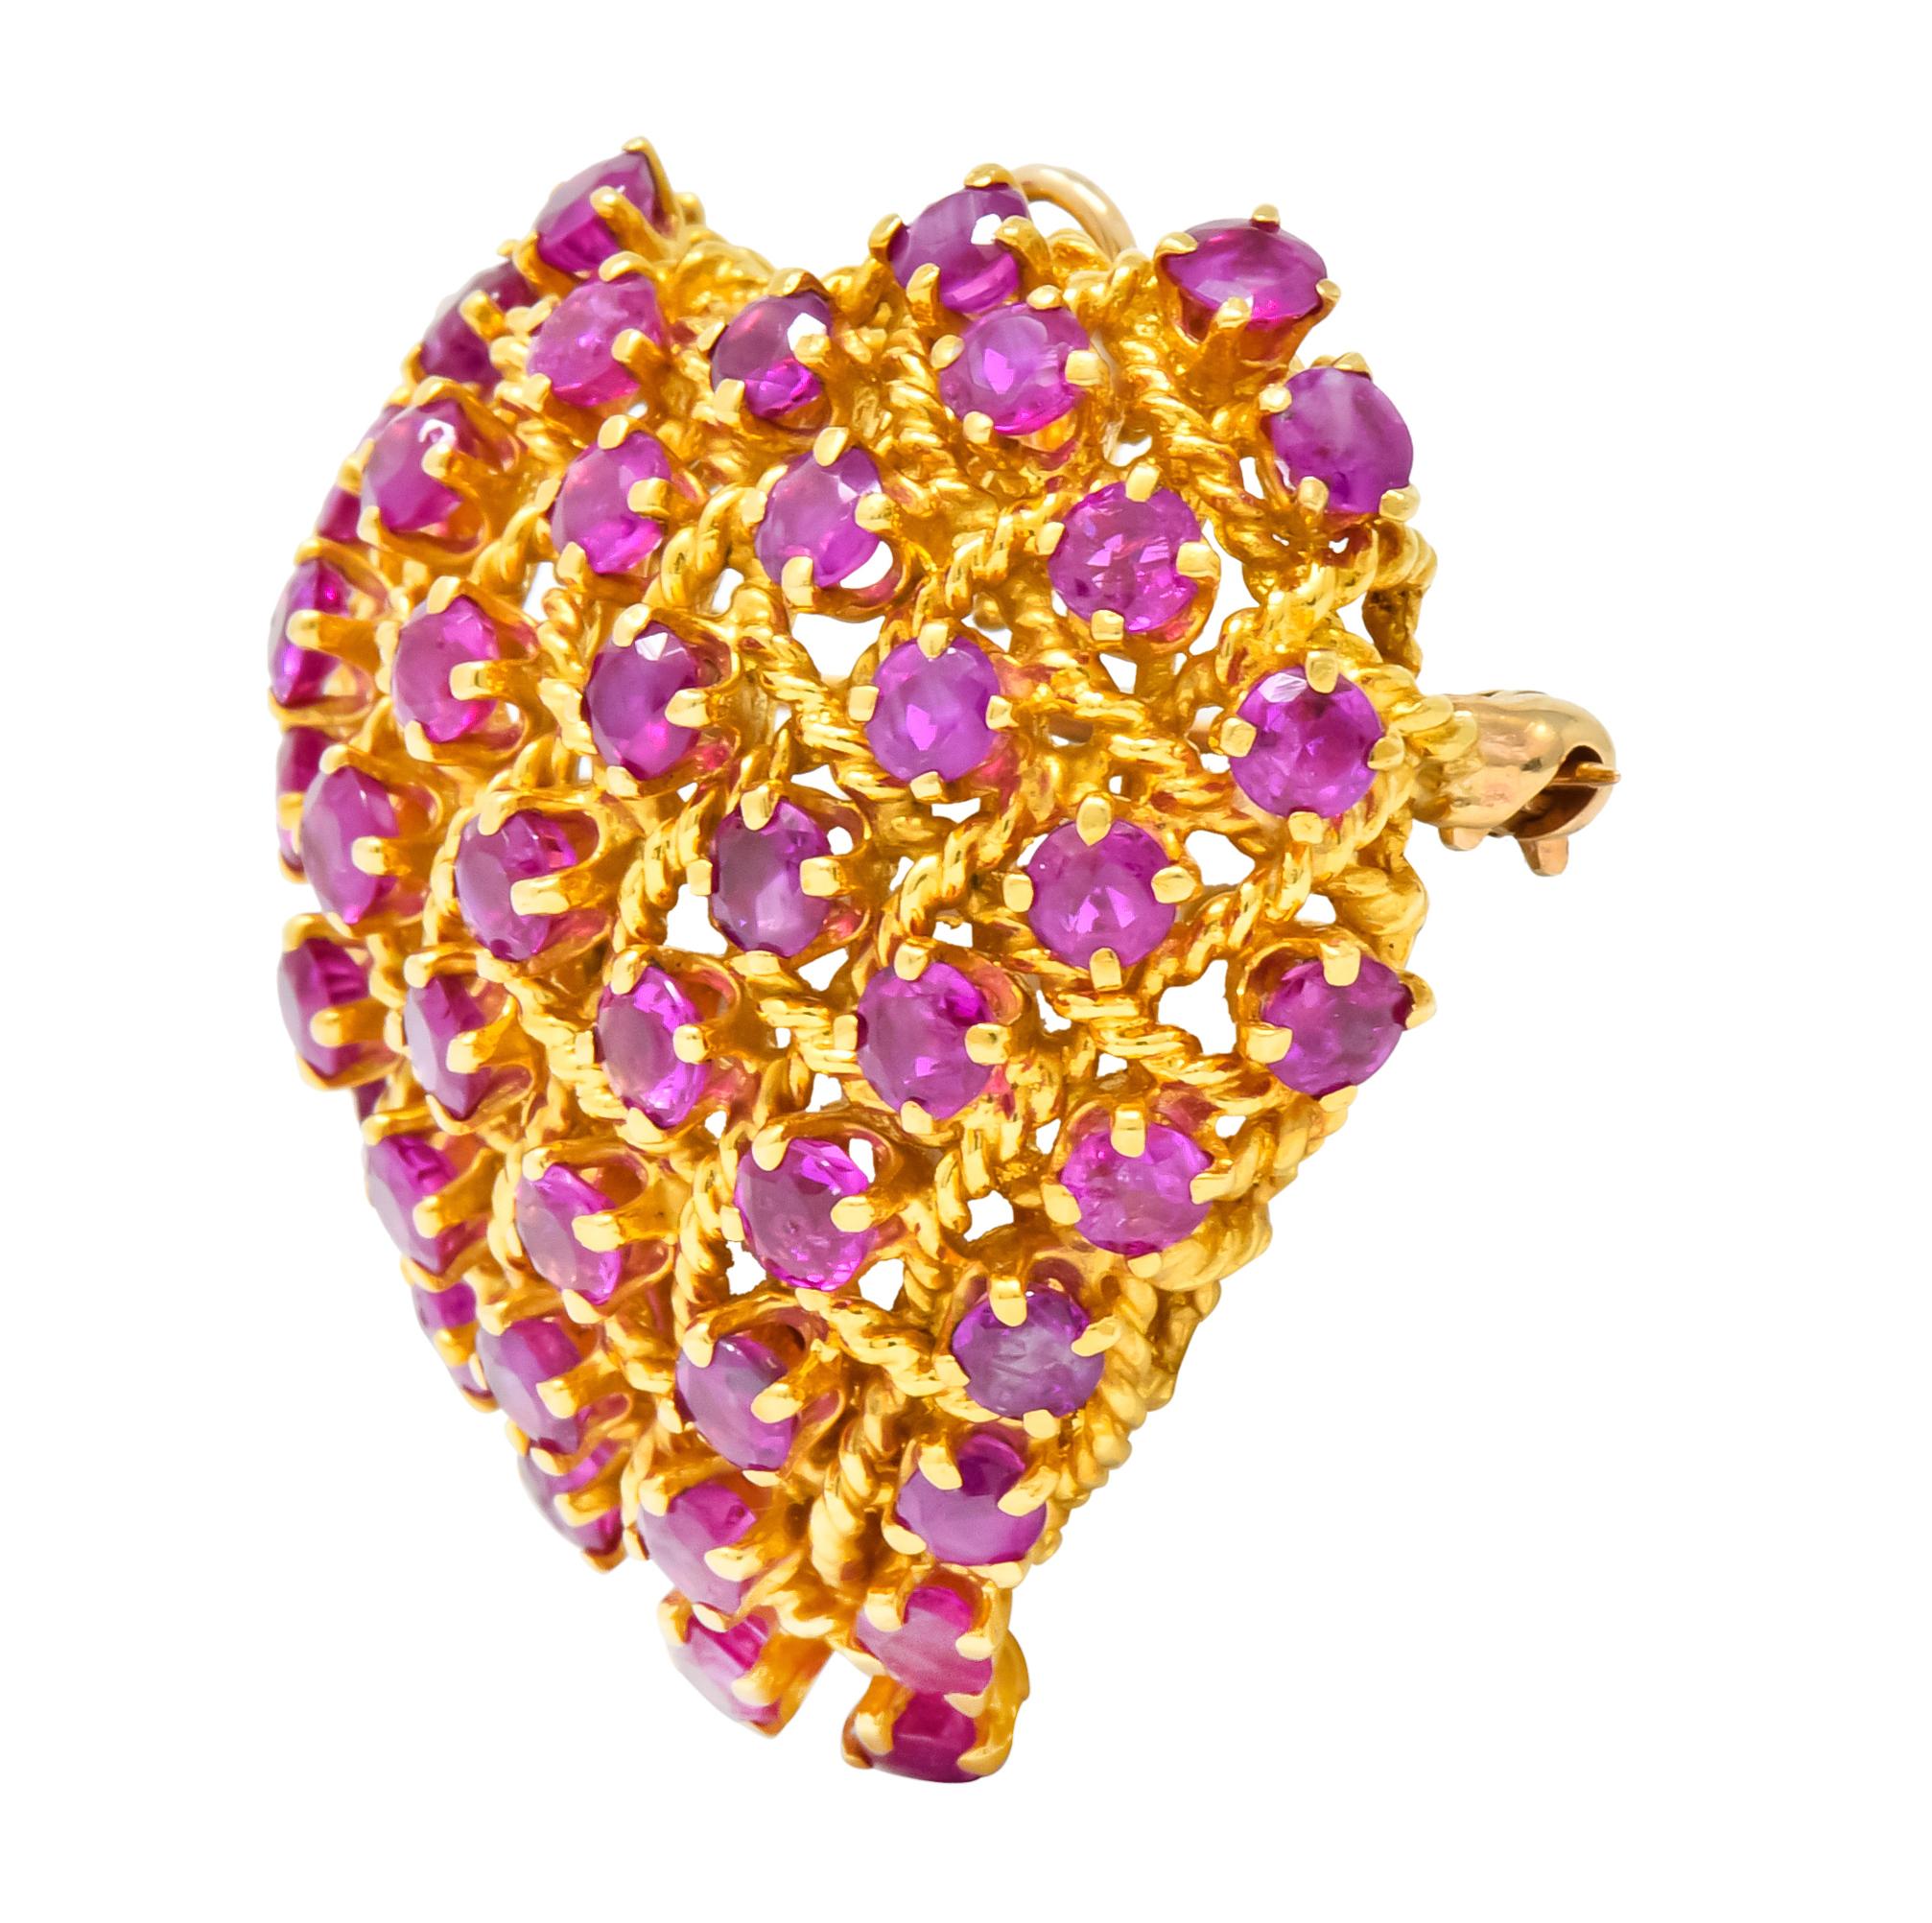 Brooch designed as pierced heart featuring a grid motif comprised of twisted cable 

Prong set throughout with round cut rubies weighing approximately 8.00 carats total, translucent raspberry red and very well matched 

Completed by 14 karat gold